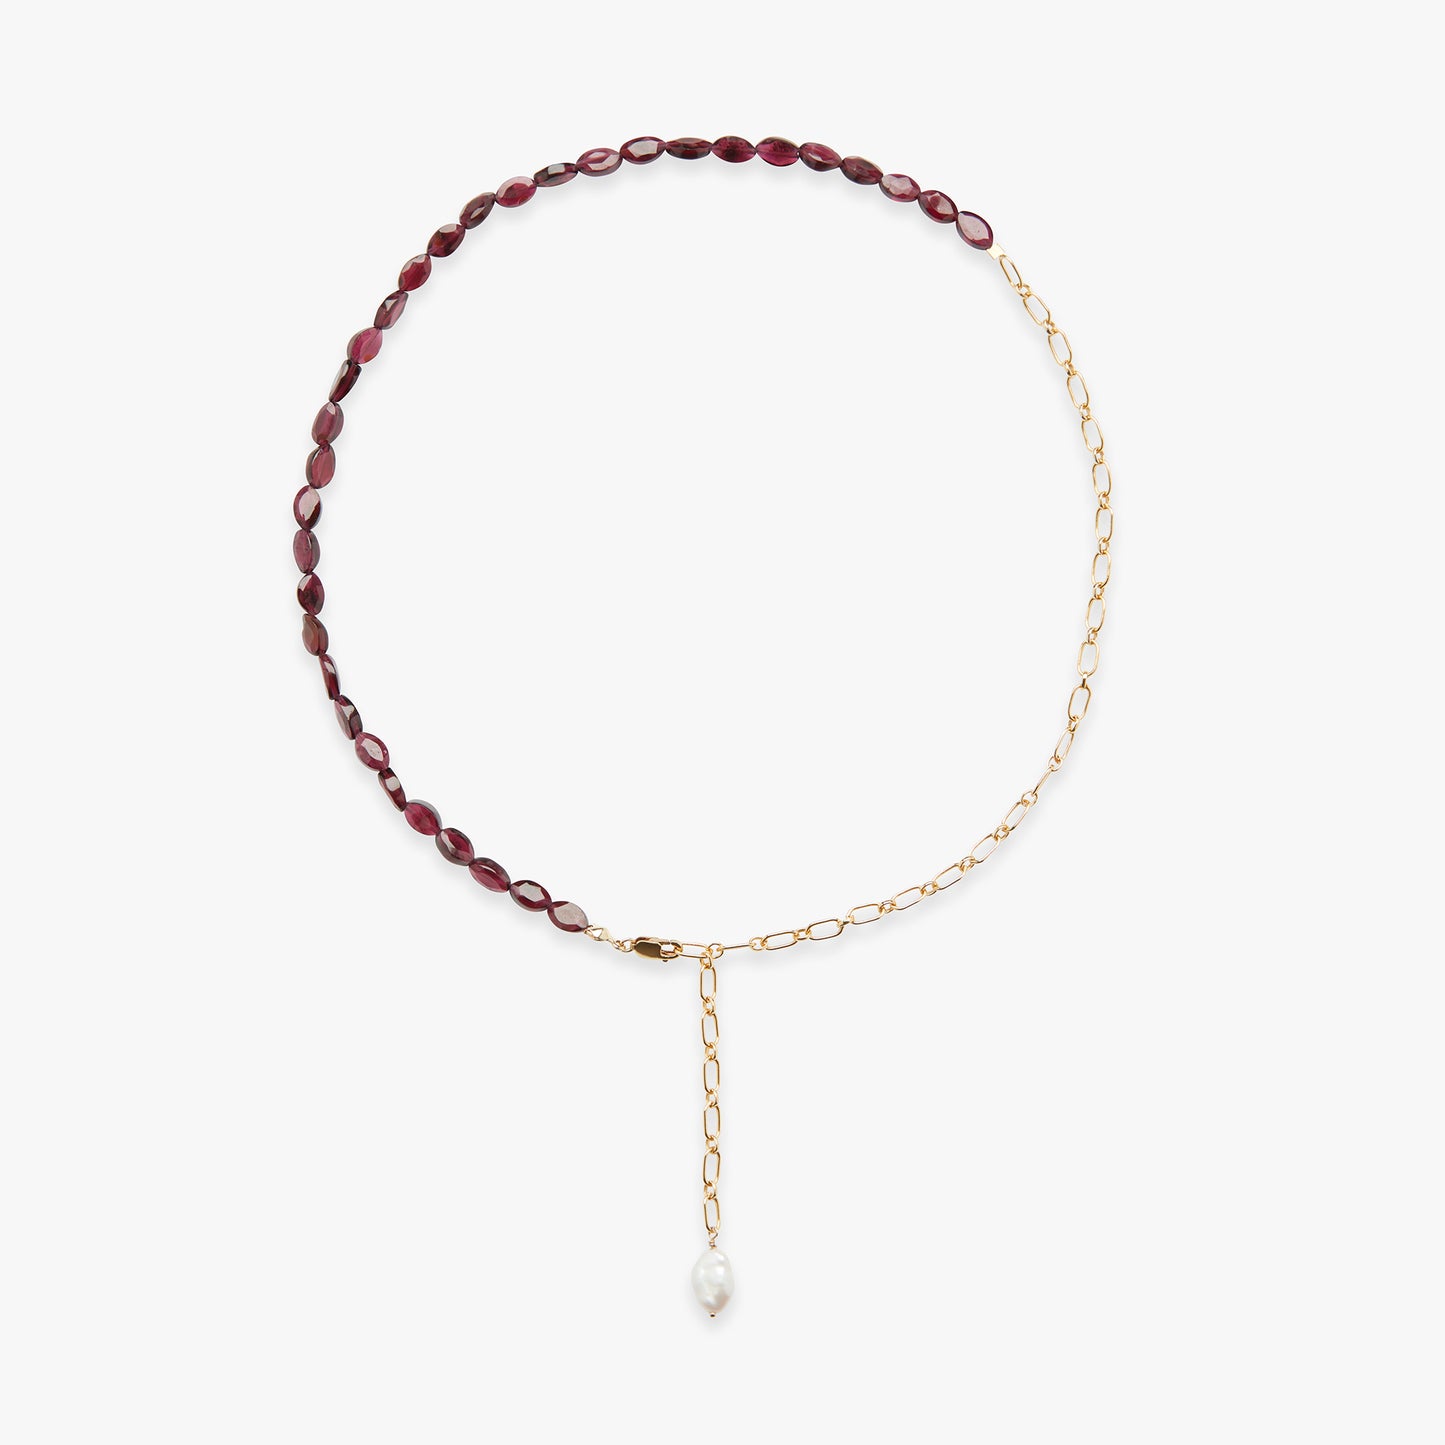 Laad afbeelding in Galerijviewer, Pomegranate Seeds lariat ketting gold filled
